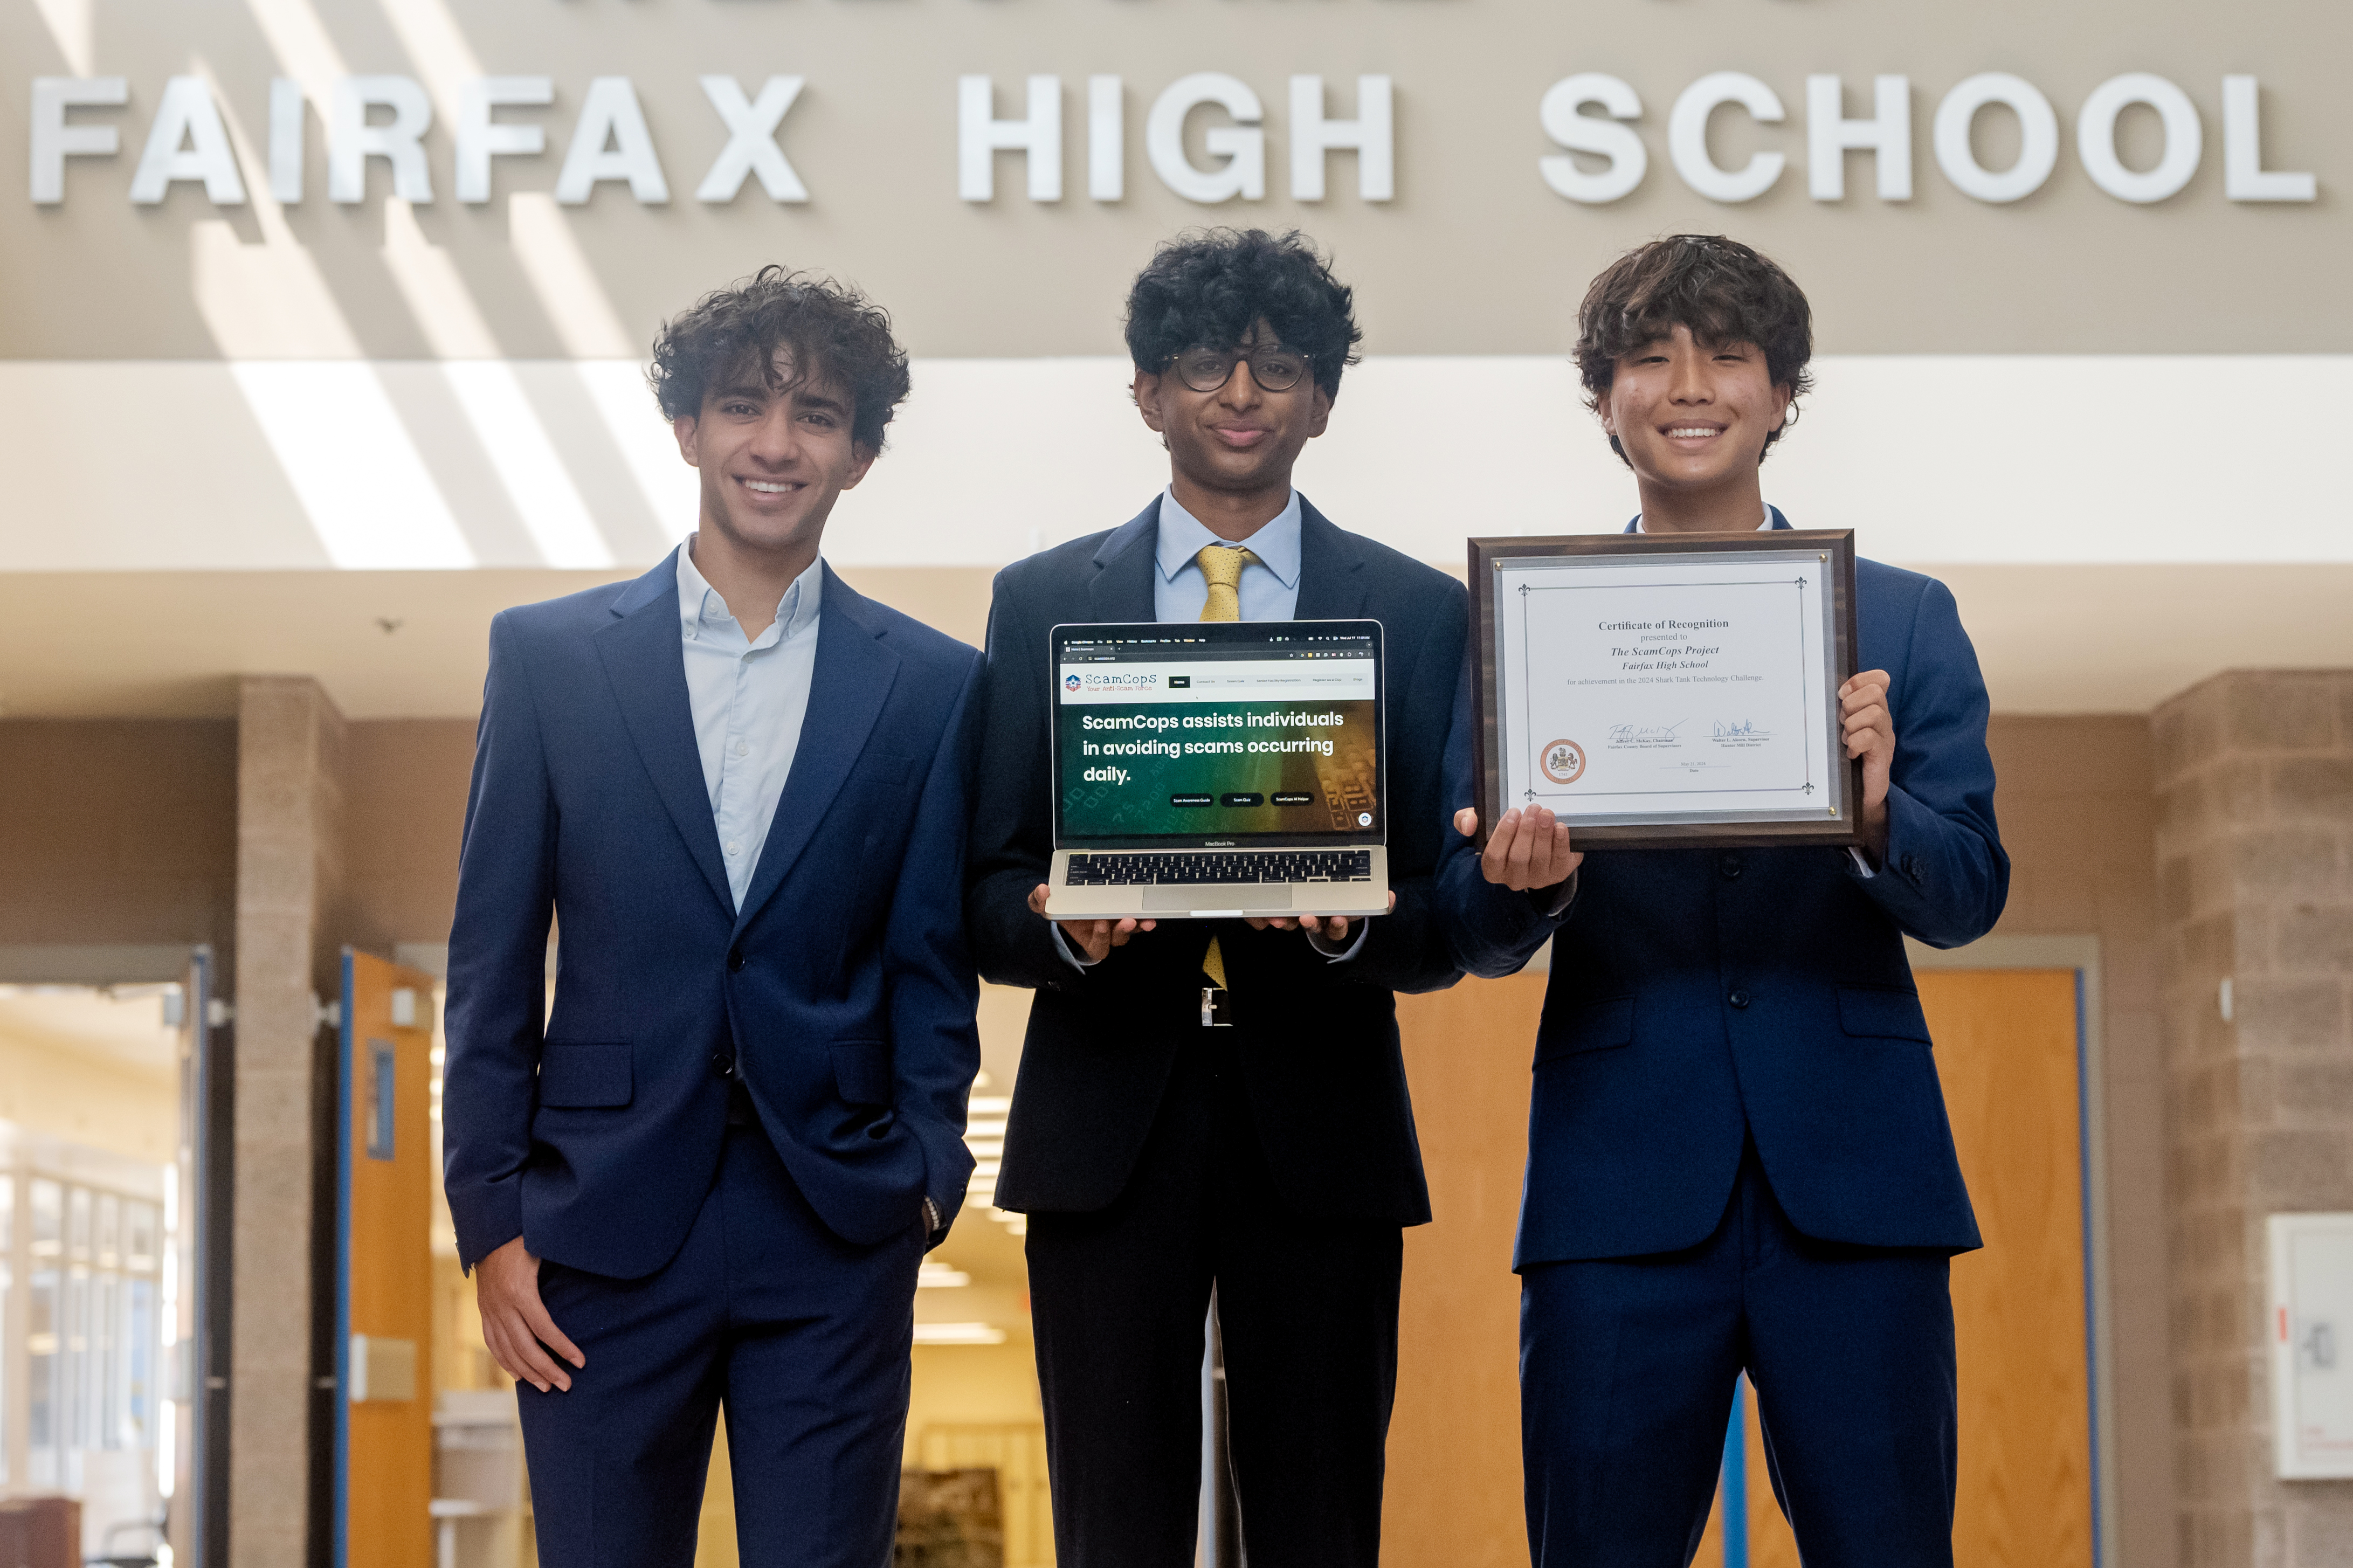 Fairfax High School students Yousif Al Atbi, Advik Atyam, and David Nam stand, smiling, under a large sign that reads: "FAIRFAX HIGH SCHOOL." Advik, at center, holds a laptop logged in to the ScamCops website. At right, David holds an award plaque the students received from Fairfax County.